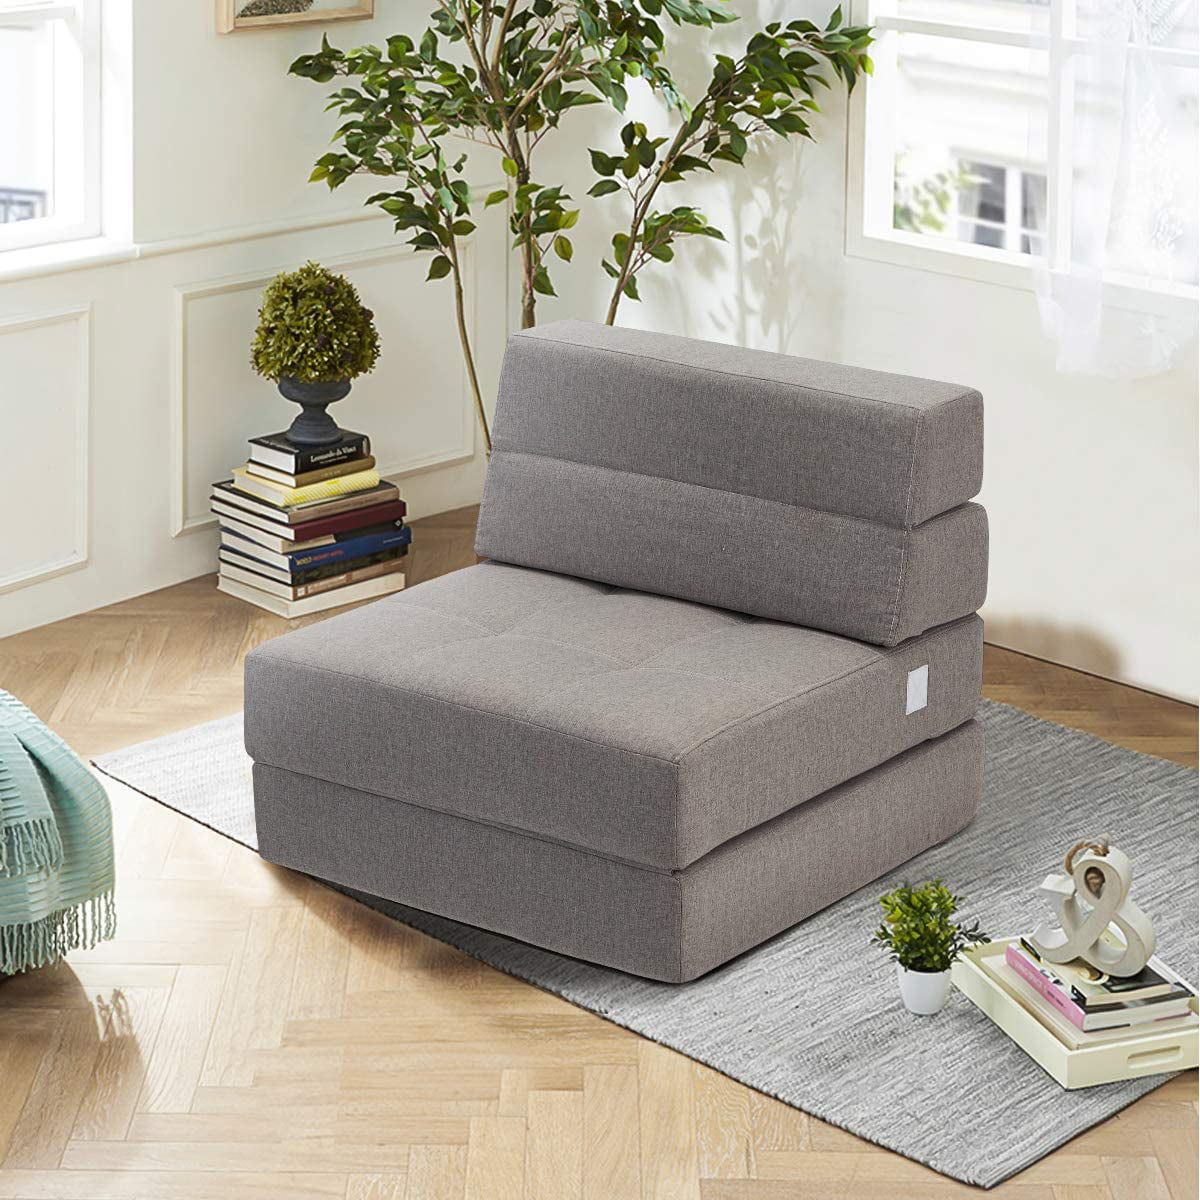 Erommy Fold Down Fabric Sofa Bed, Sleeper Sofa 2 In 1 Tri Fold Grey With Regard To 2 In 1 Foldable Sofas (Gallery 1 of 20)